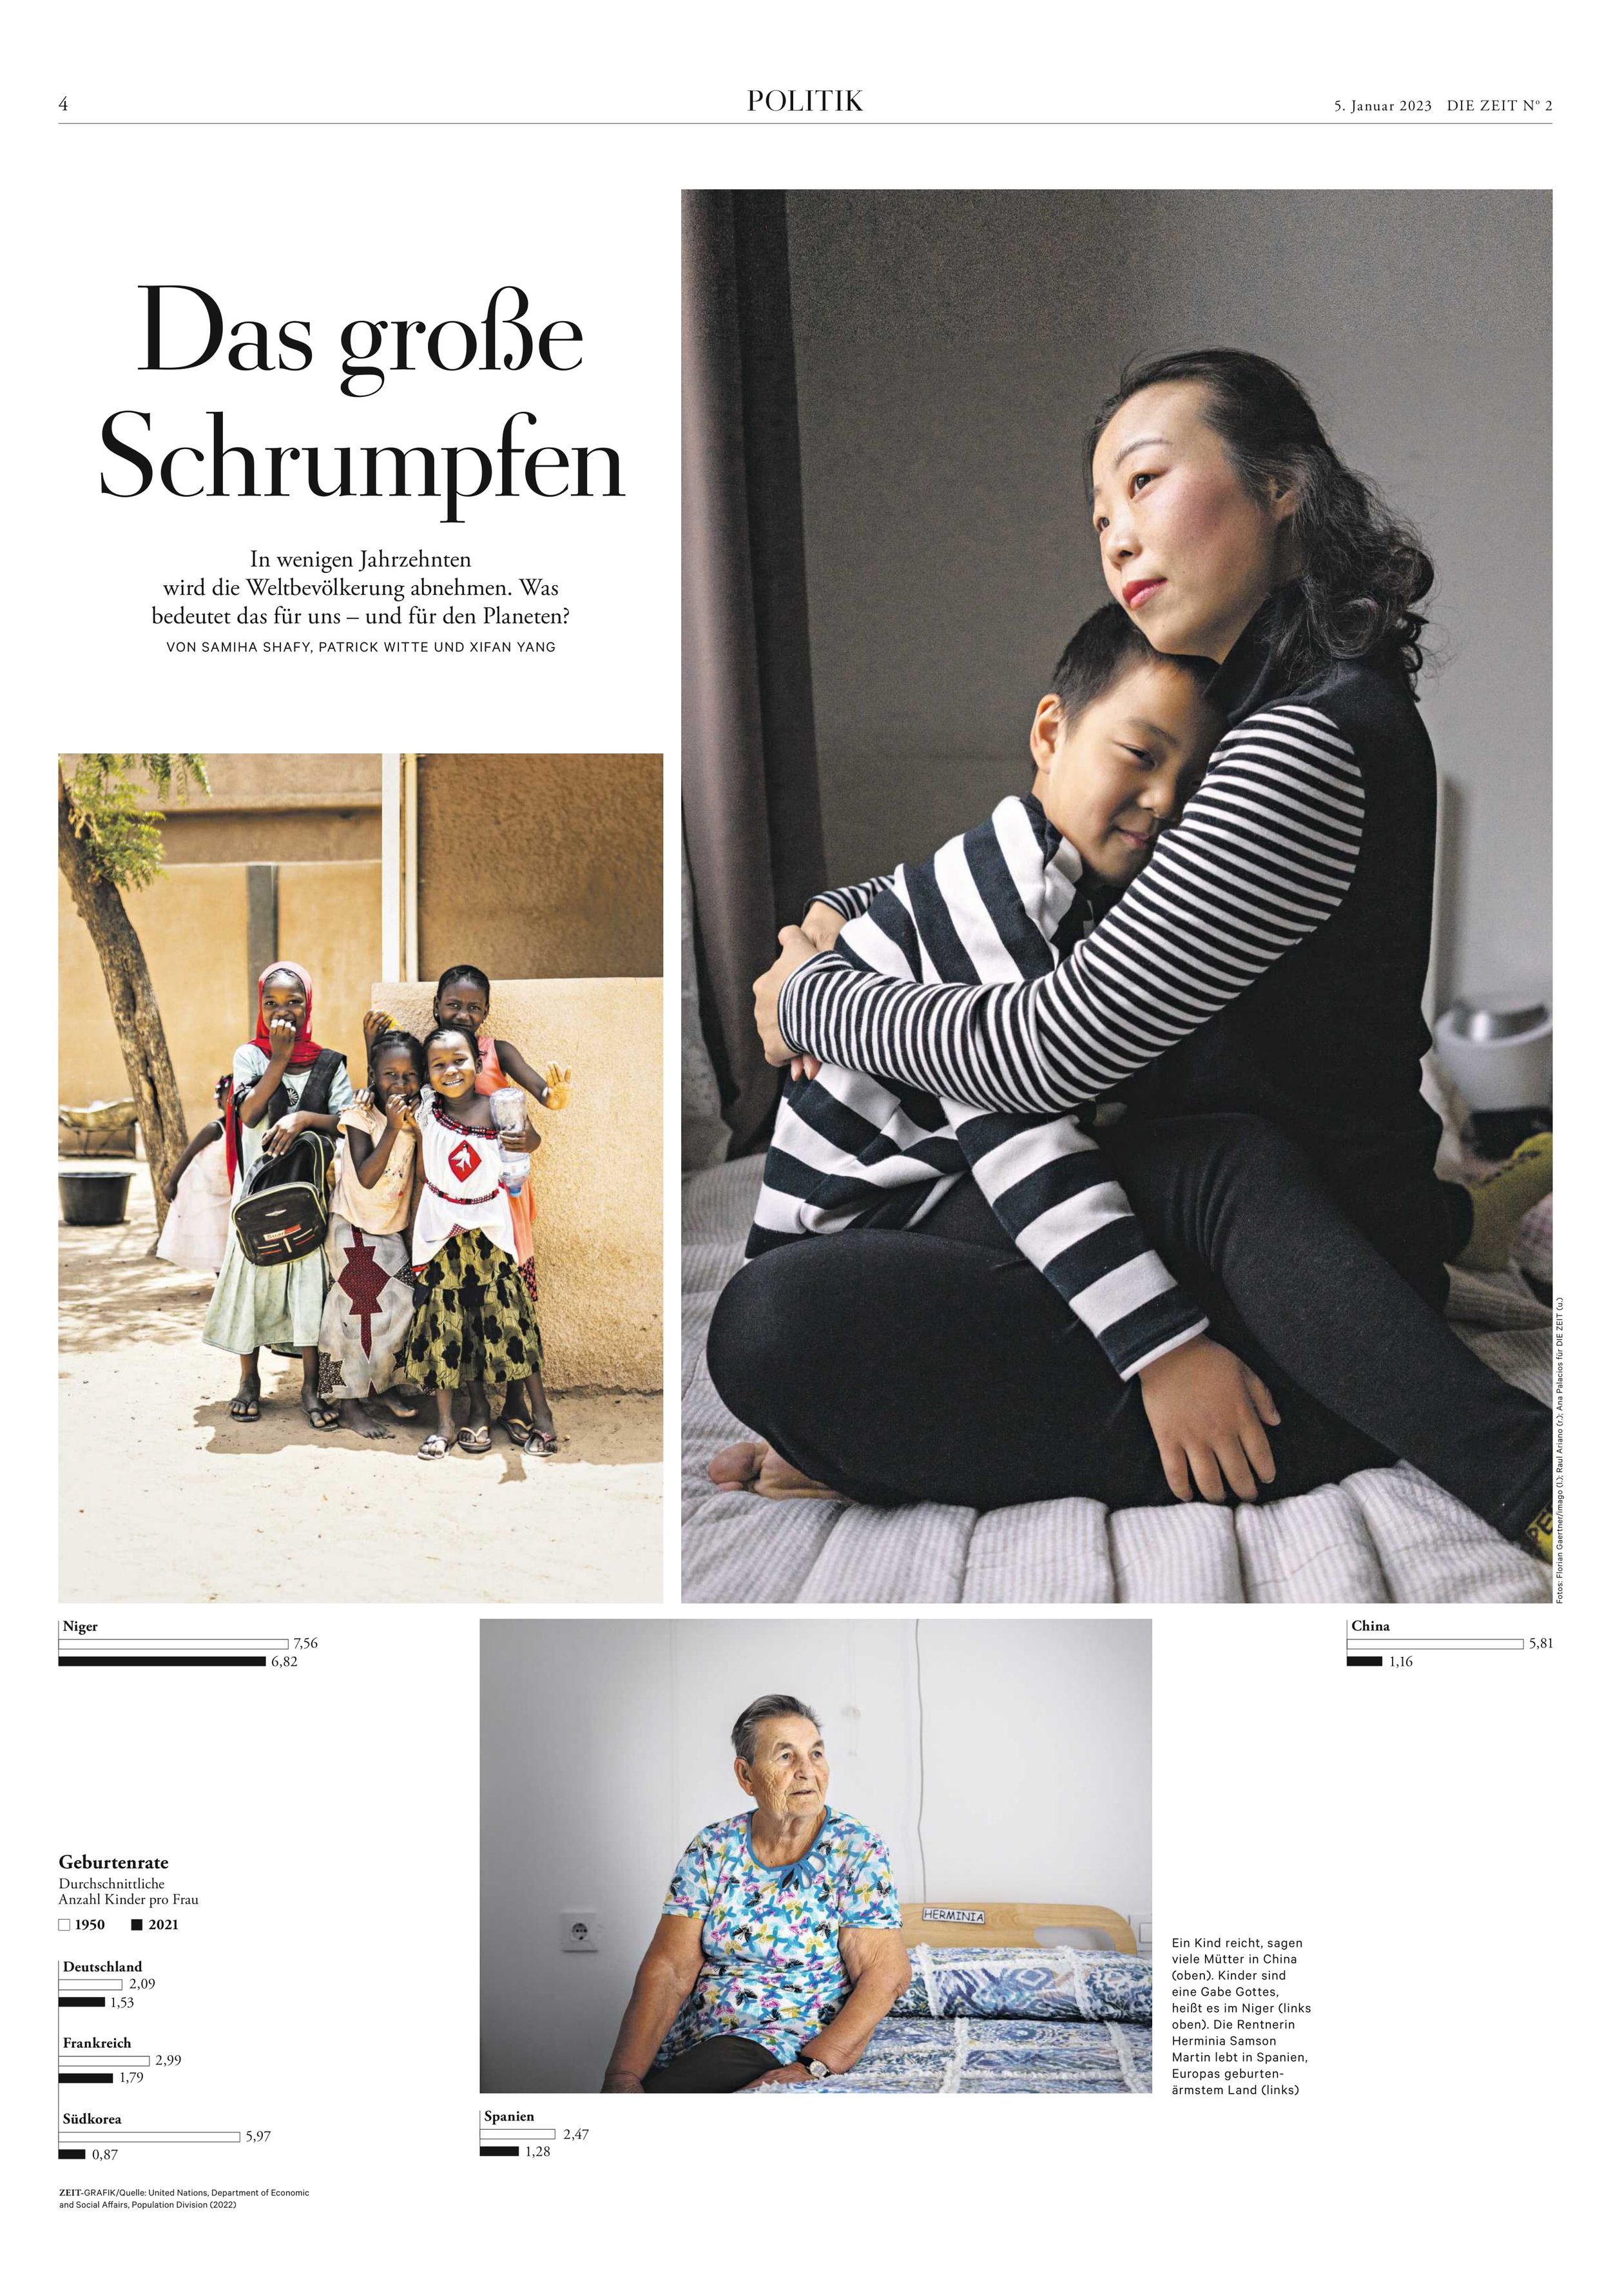 Single mother in China published on DIE ZEIT 